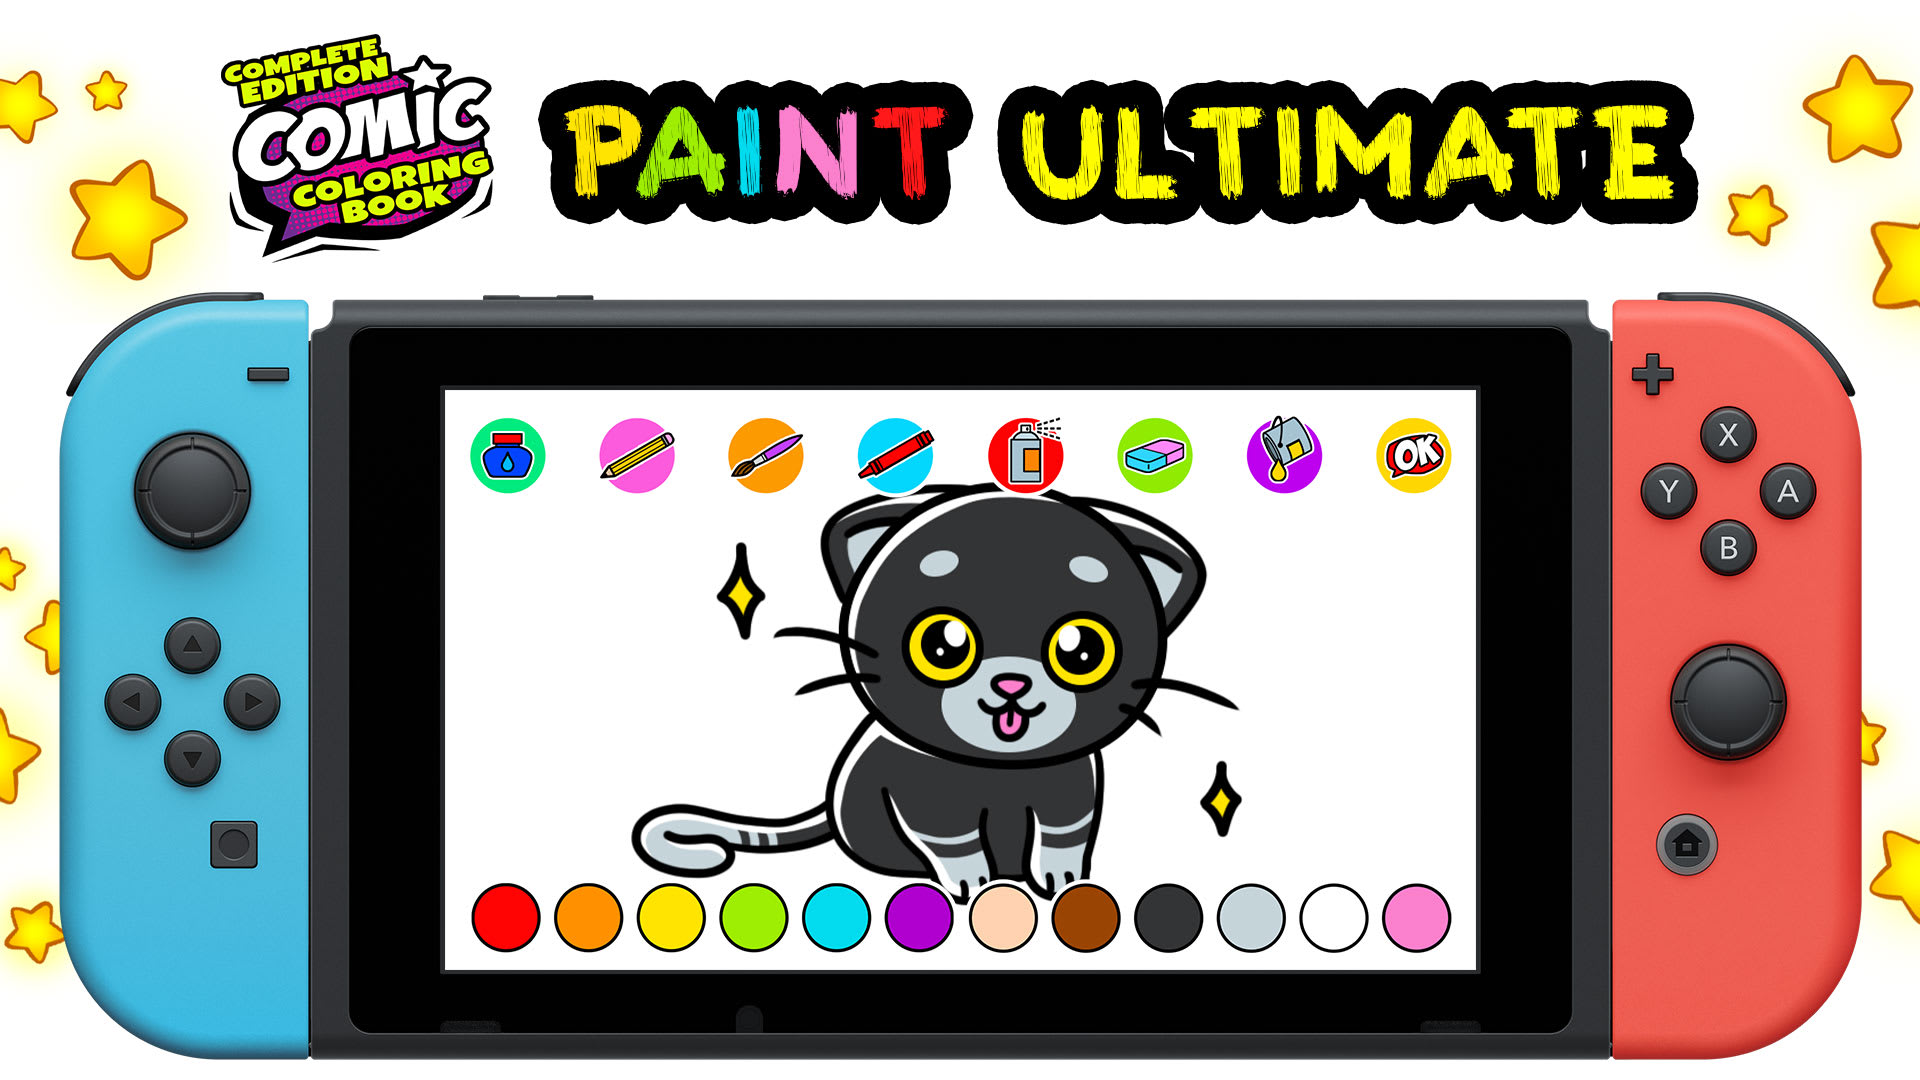 Comic Coloring Book Complete Edition: PAINT Ultimate